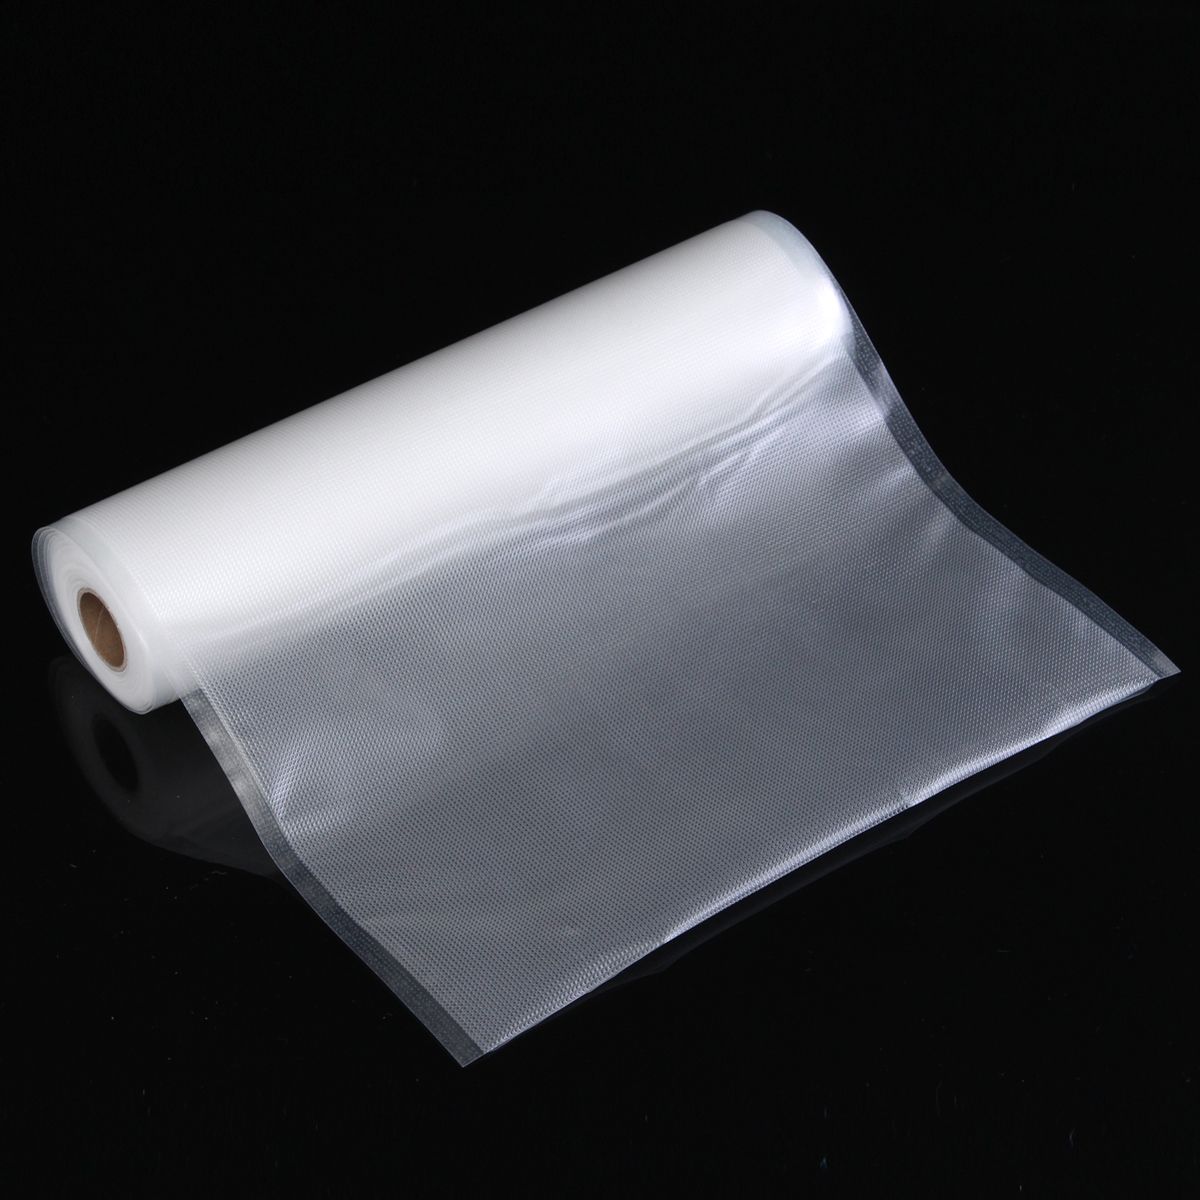 7-Different-Size-Transparent-Vacuum-Sealer-Bags-Rolls-Food-Saver-Seal-Storage-Package-Bags-1157190